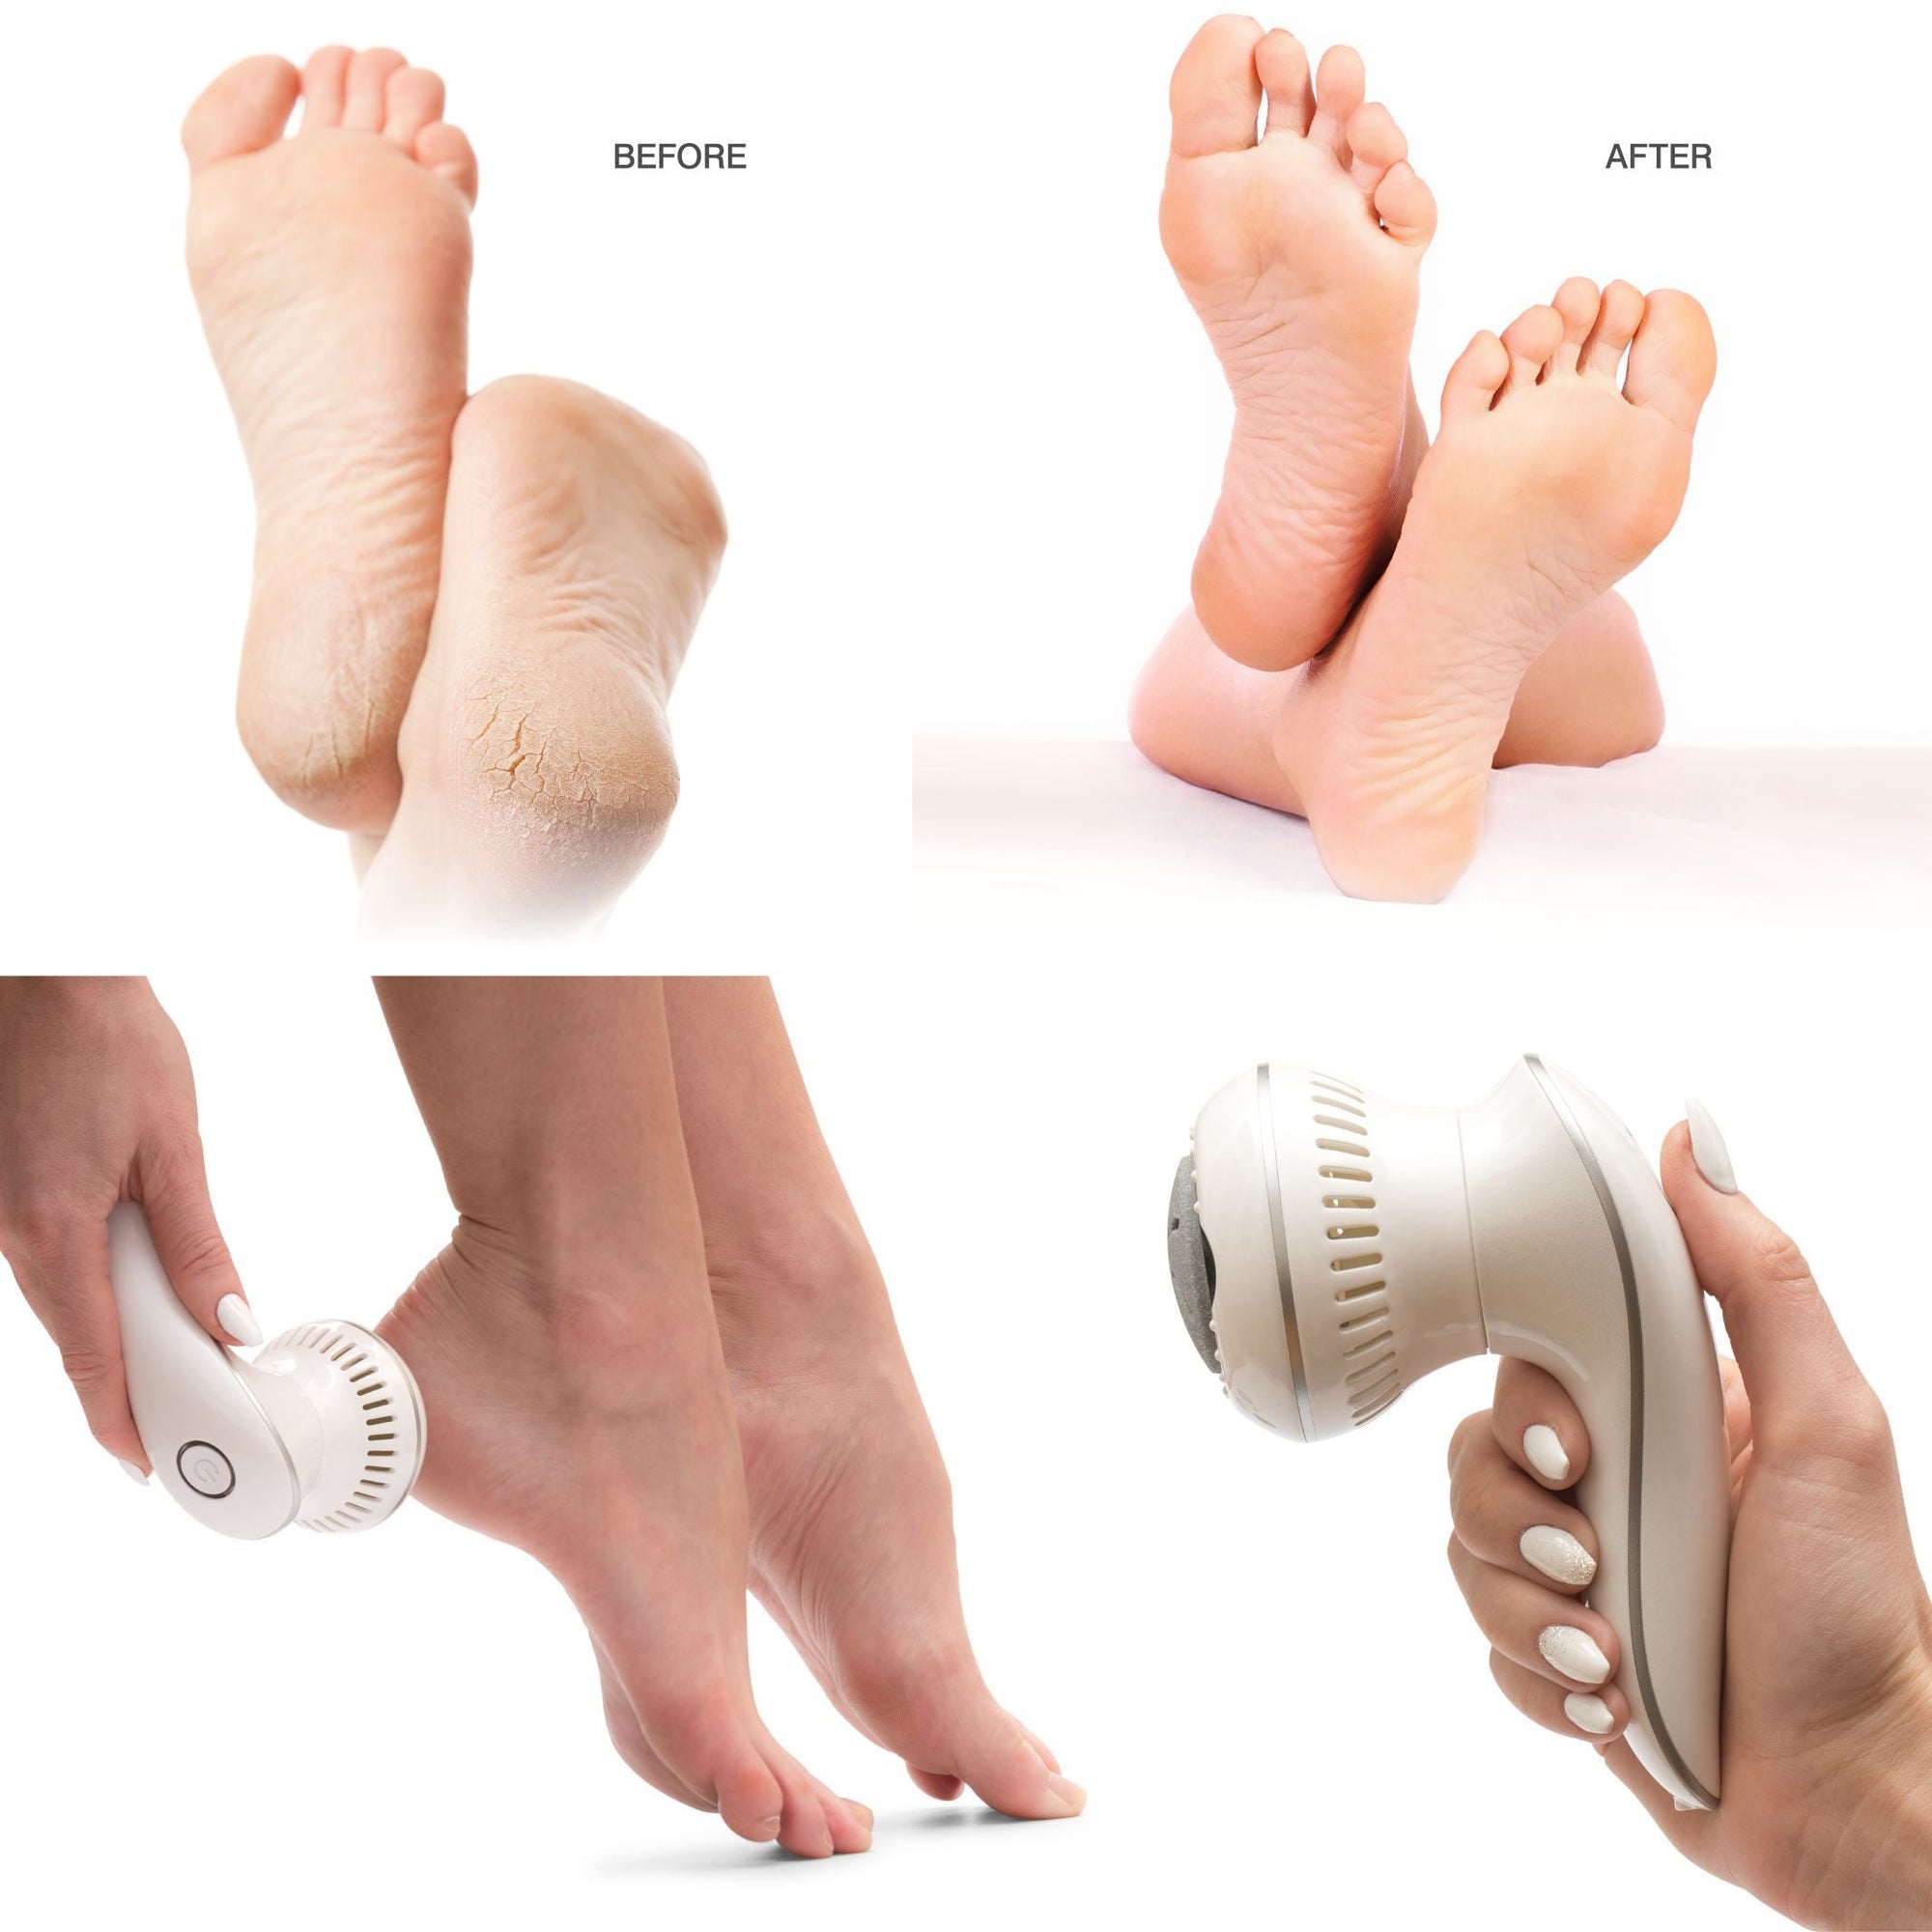 before image of dry skin cracked heels and after of smooth skin on feet alongside images of the 60 second spa pedi in use